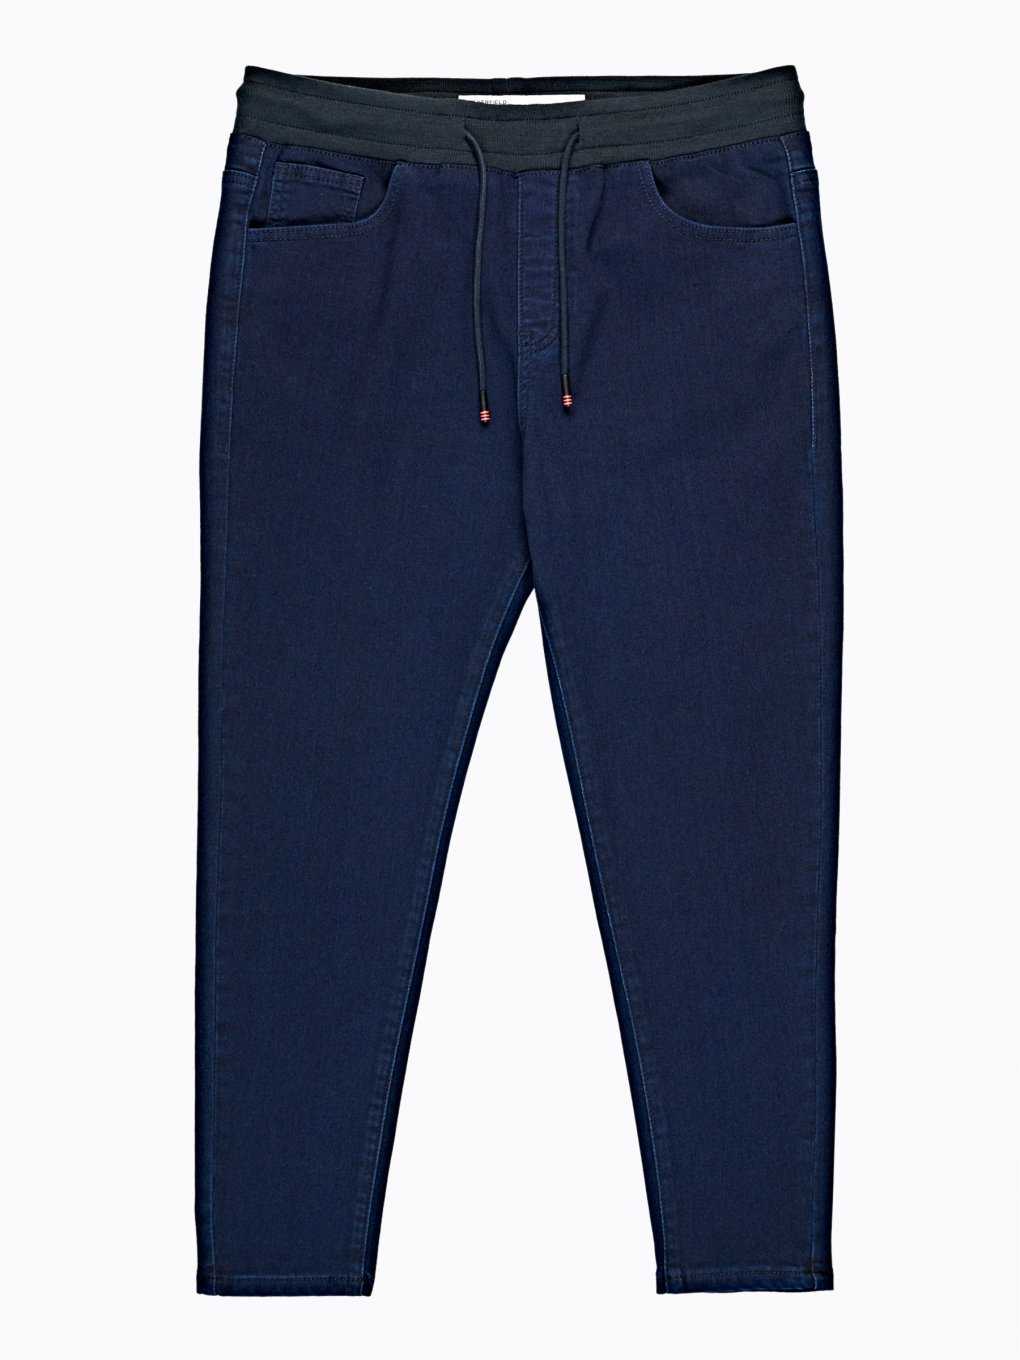 CROPPED STRAIGHT SLIM FIT JEANS